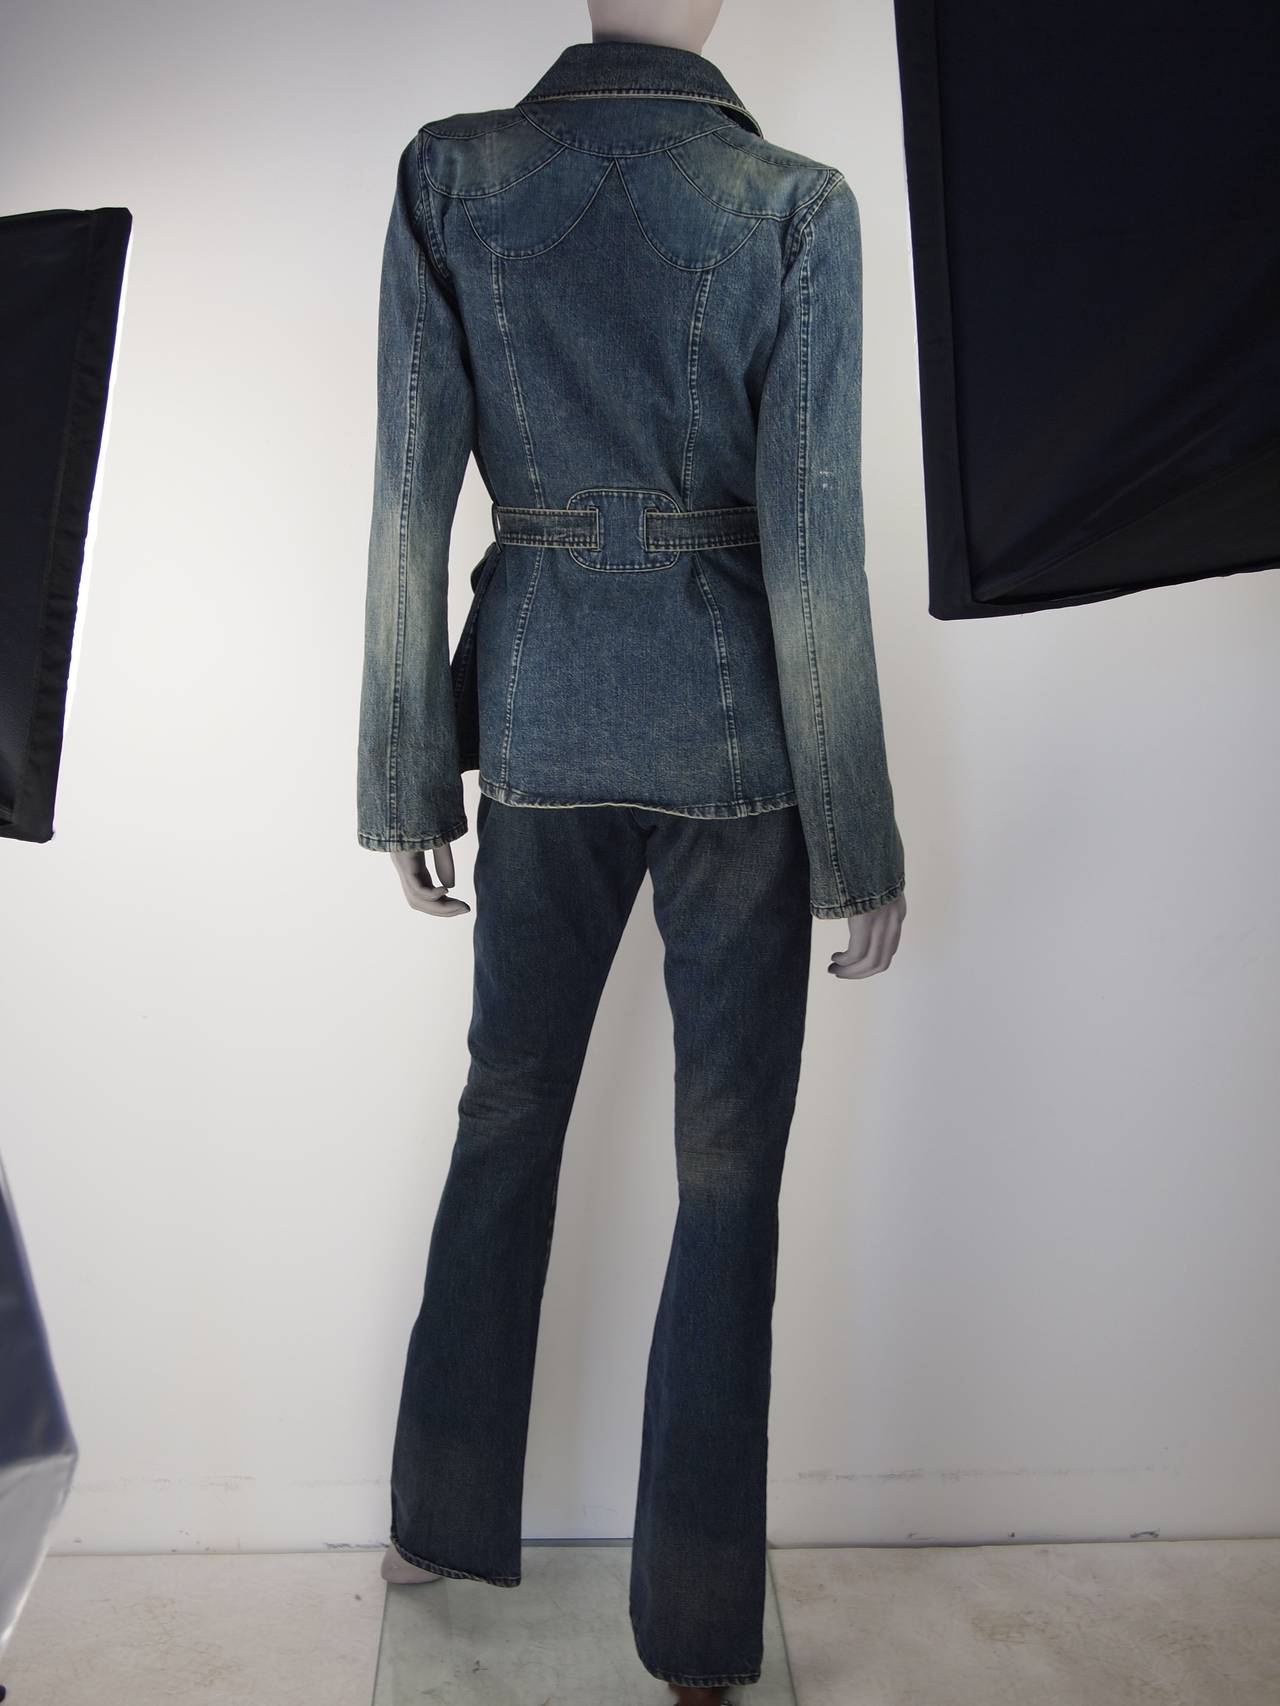 Henry Duarte denim pant suit, button front jacket, two front pockets, front lace pant with two pockets.

Jacket: bust 38